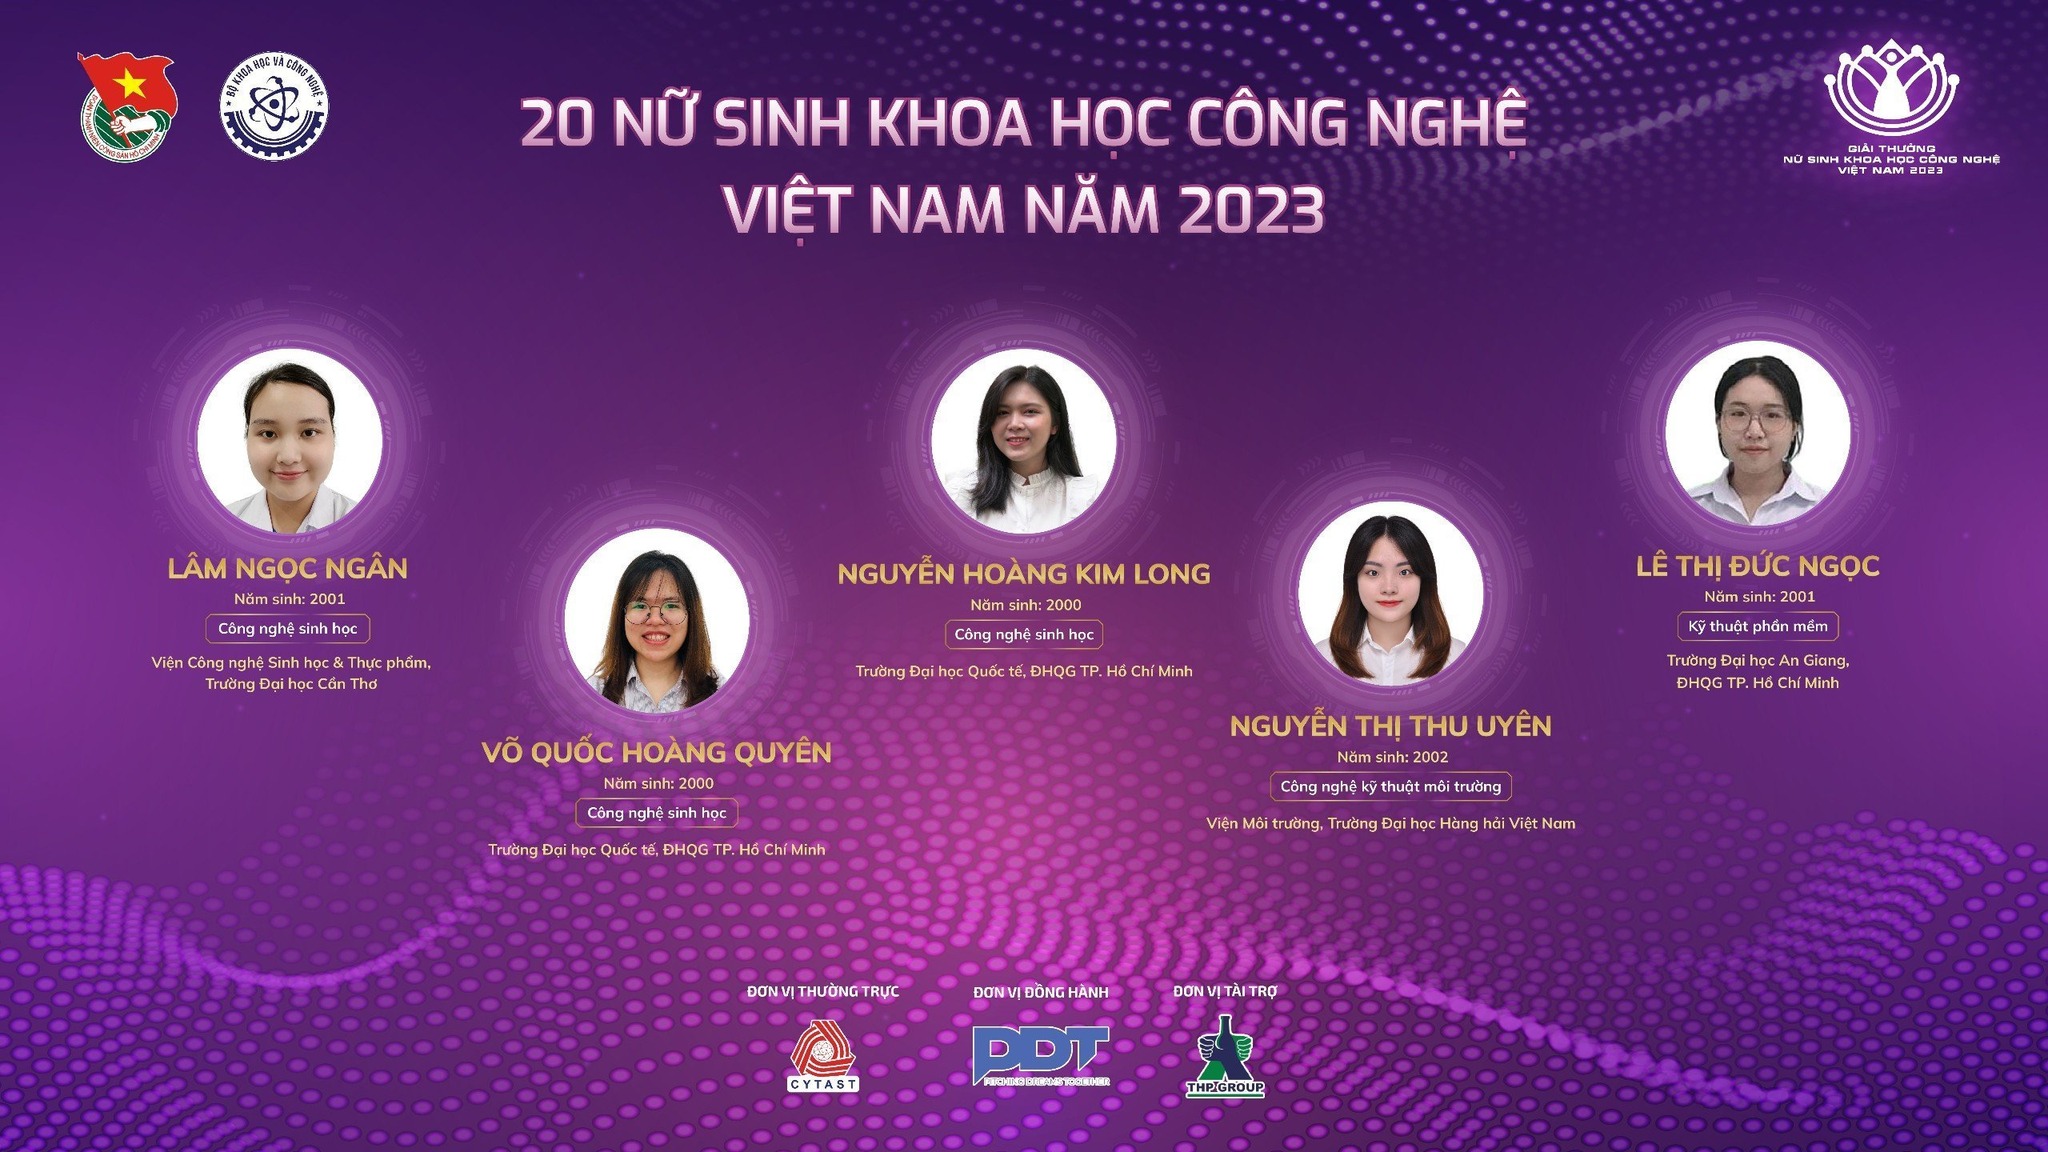 THE VIETNAM FEMALE SCIENCE AND TECHNOLOGY STUDENT AWARD